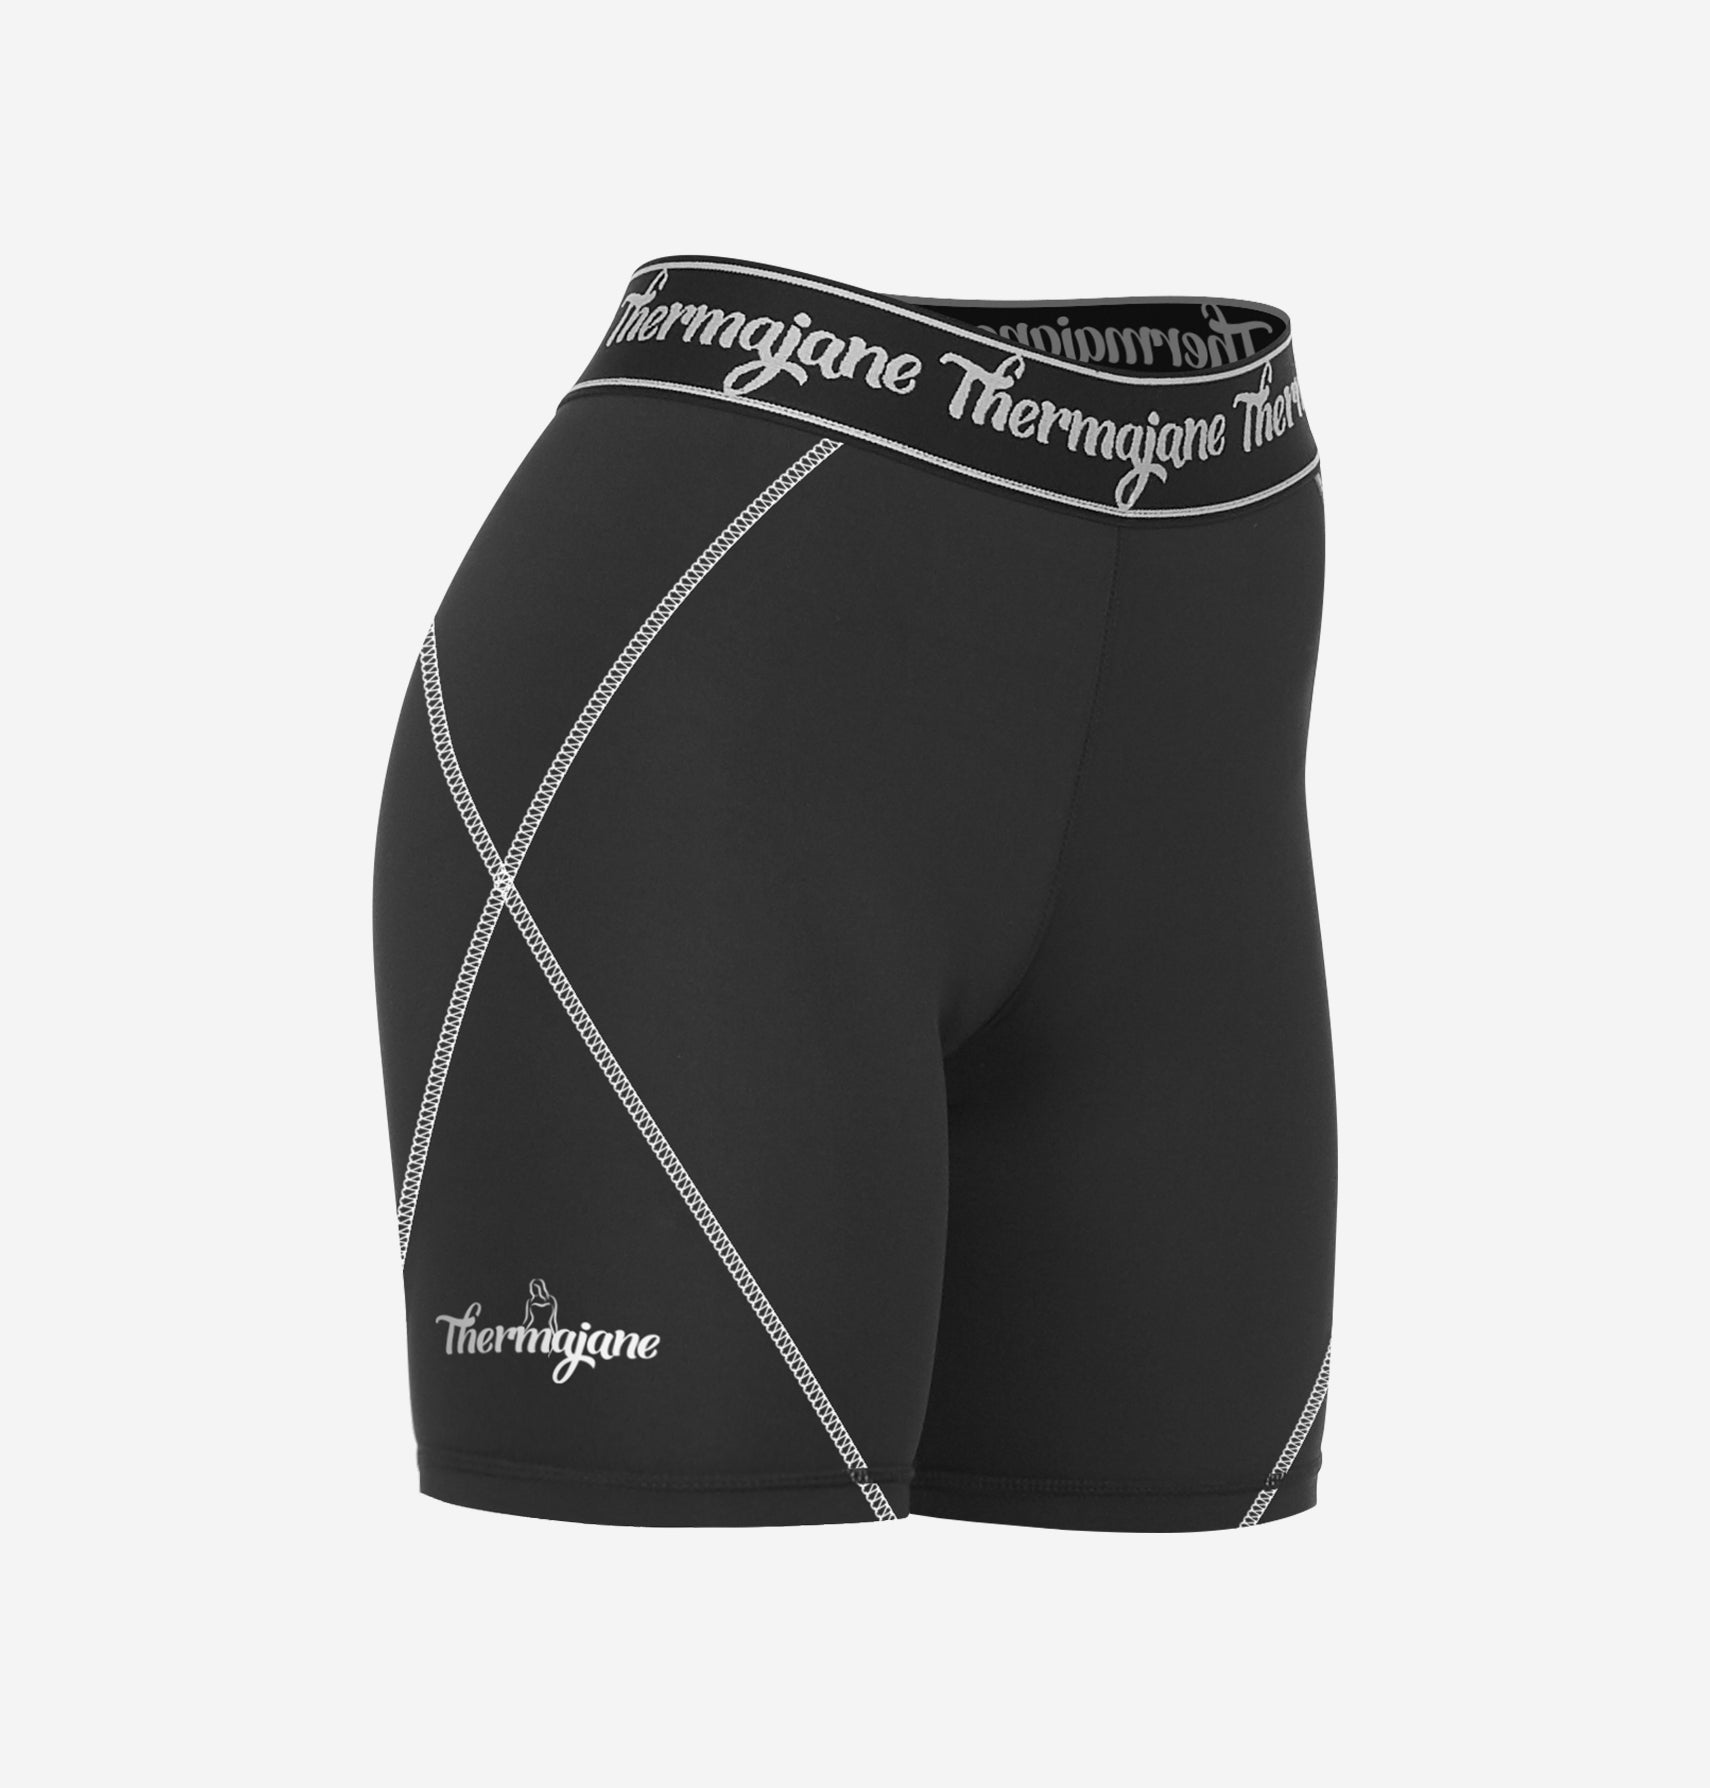 Women's Compression Shorts: Free Shipping (US) Returns & Exchanges